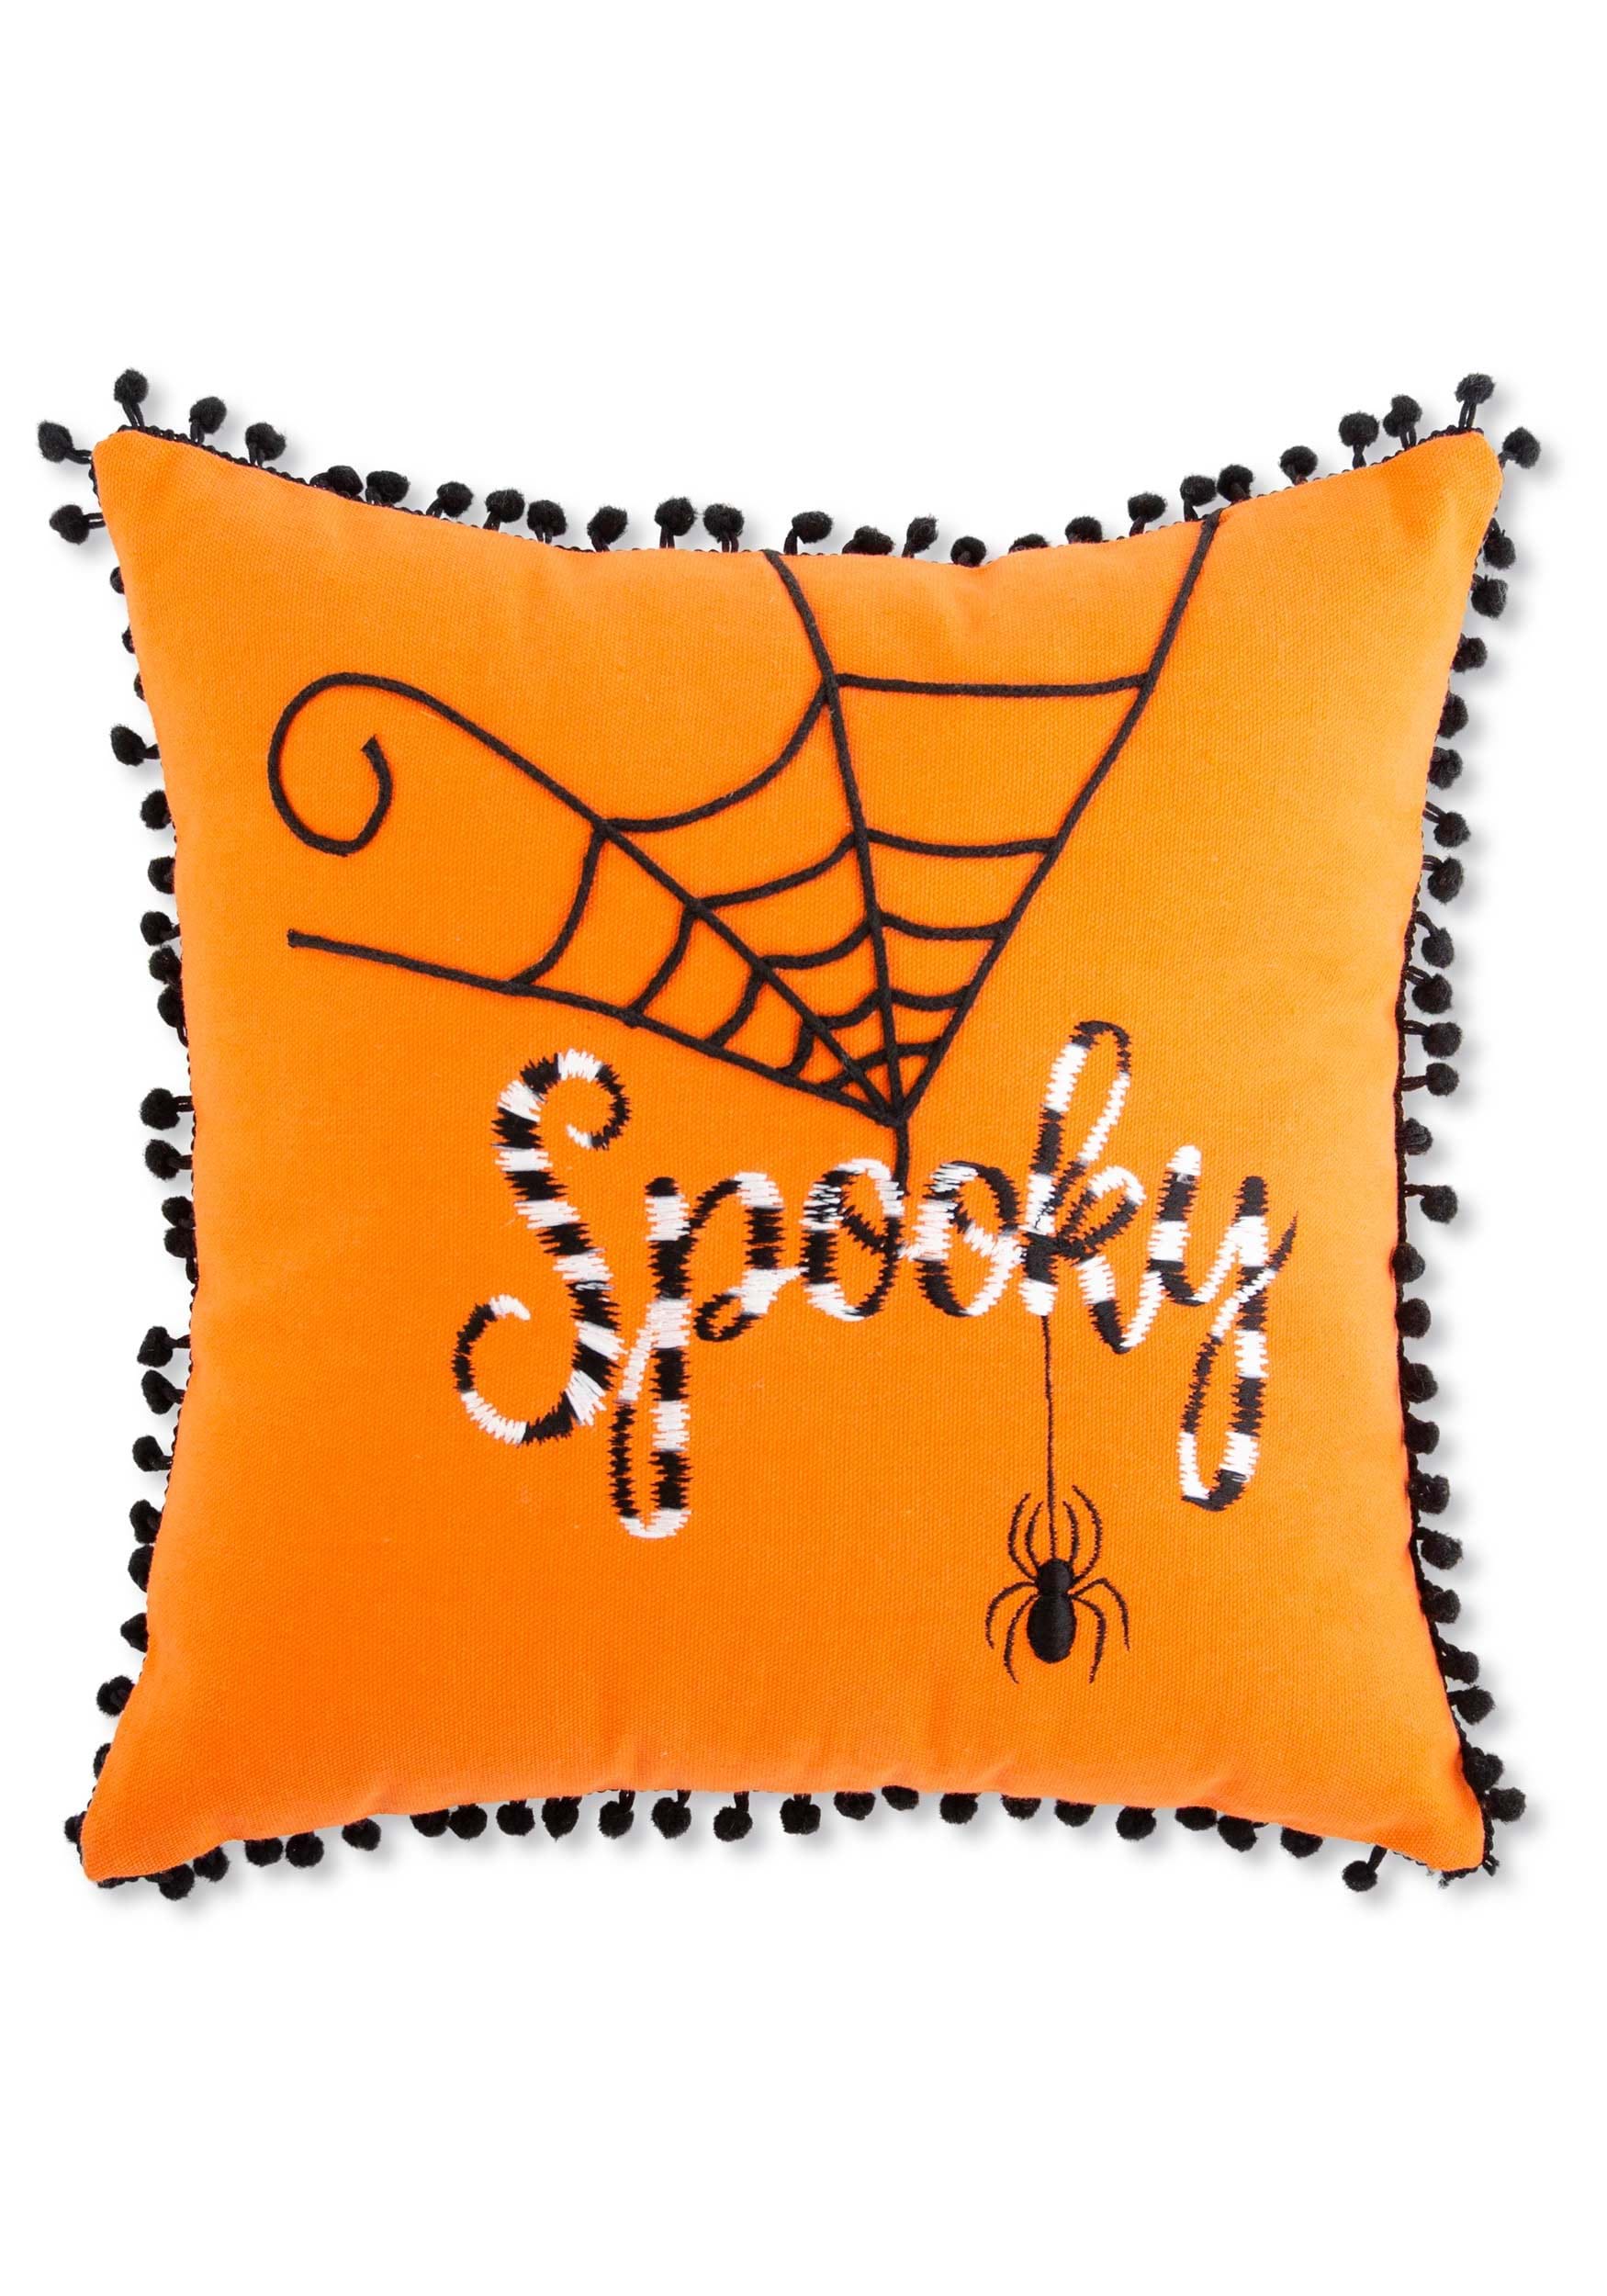 https://images.halloweencostumes.com/products/82243/1-1/orange-halloween-pillow-with-black-white-embroidery.jpg